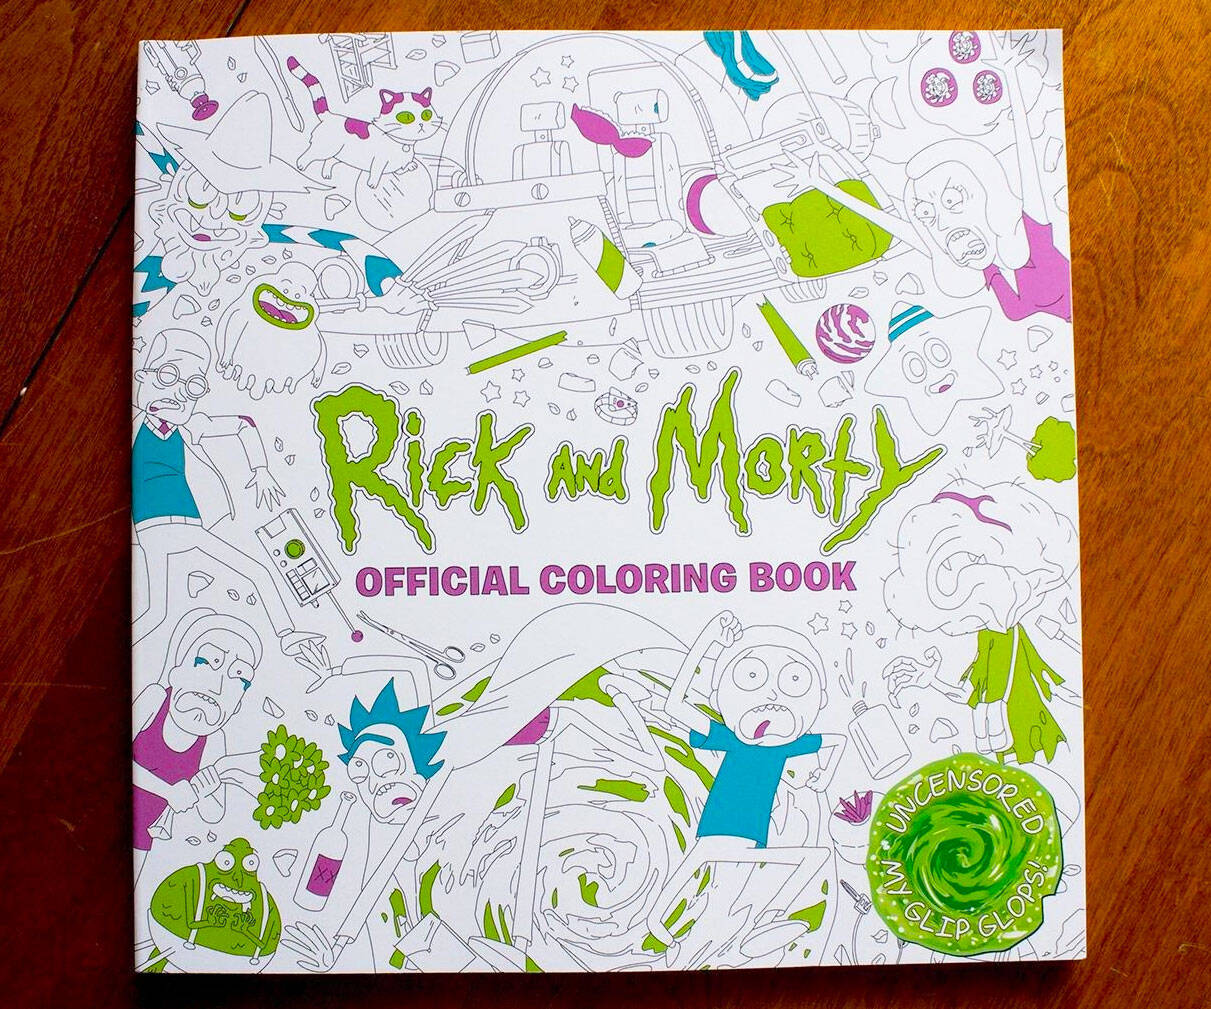 Rick & Morty Official Coloring Book - coolthings.us